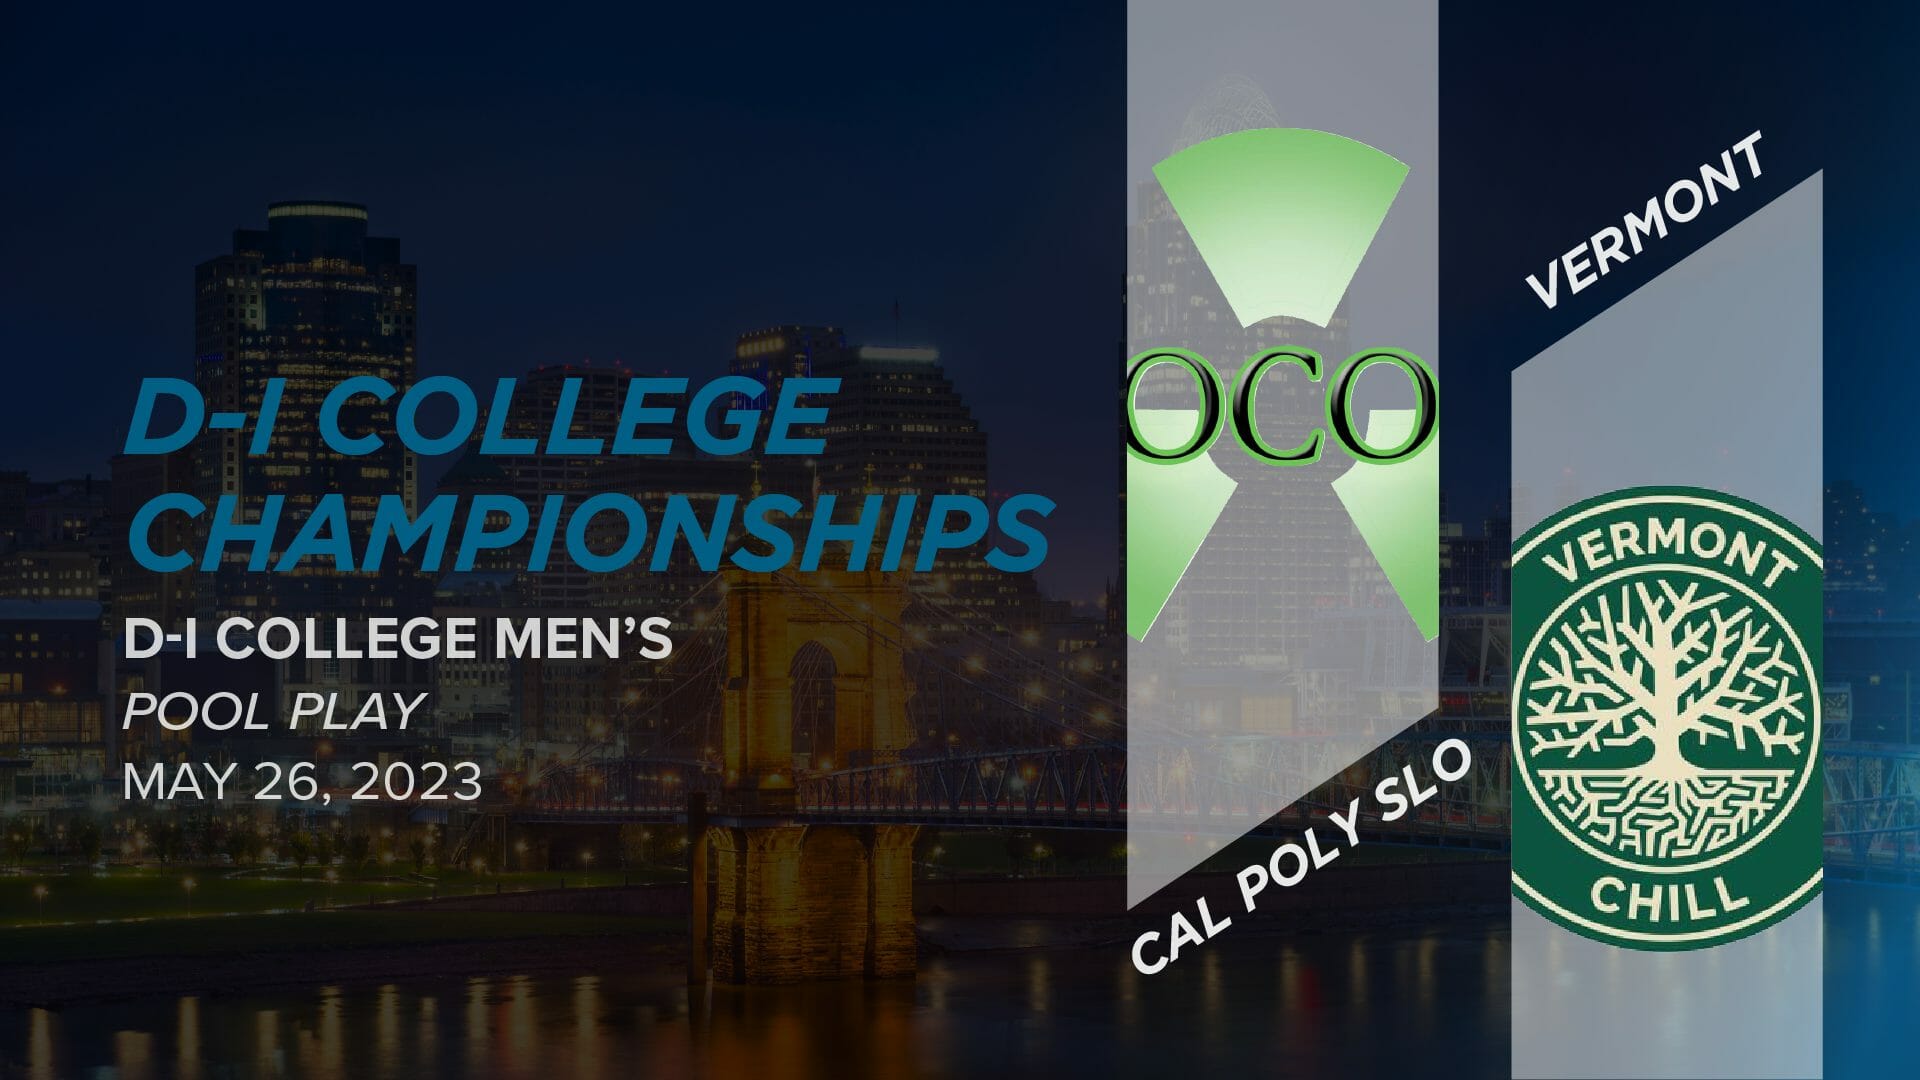 [FP] Cal Poly SLO vs. Vermont (Men's Pool Play) 2023 DI College